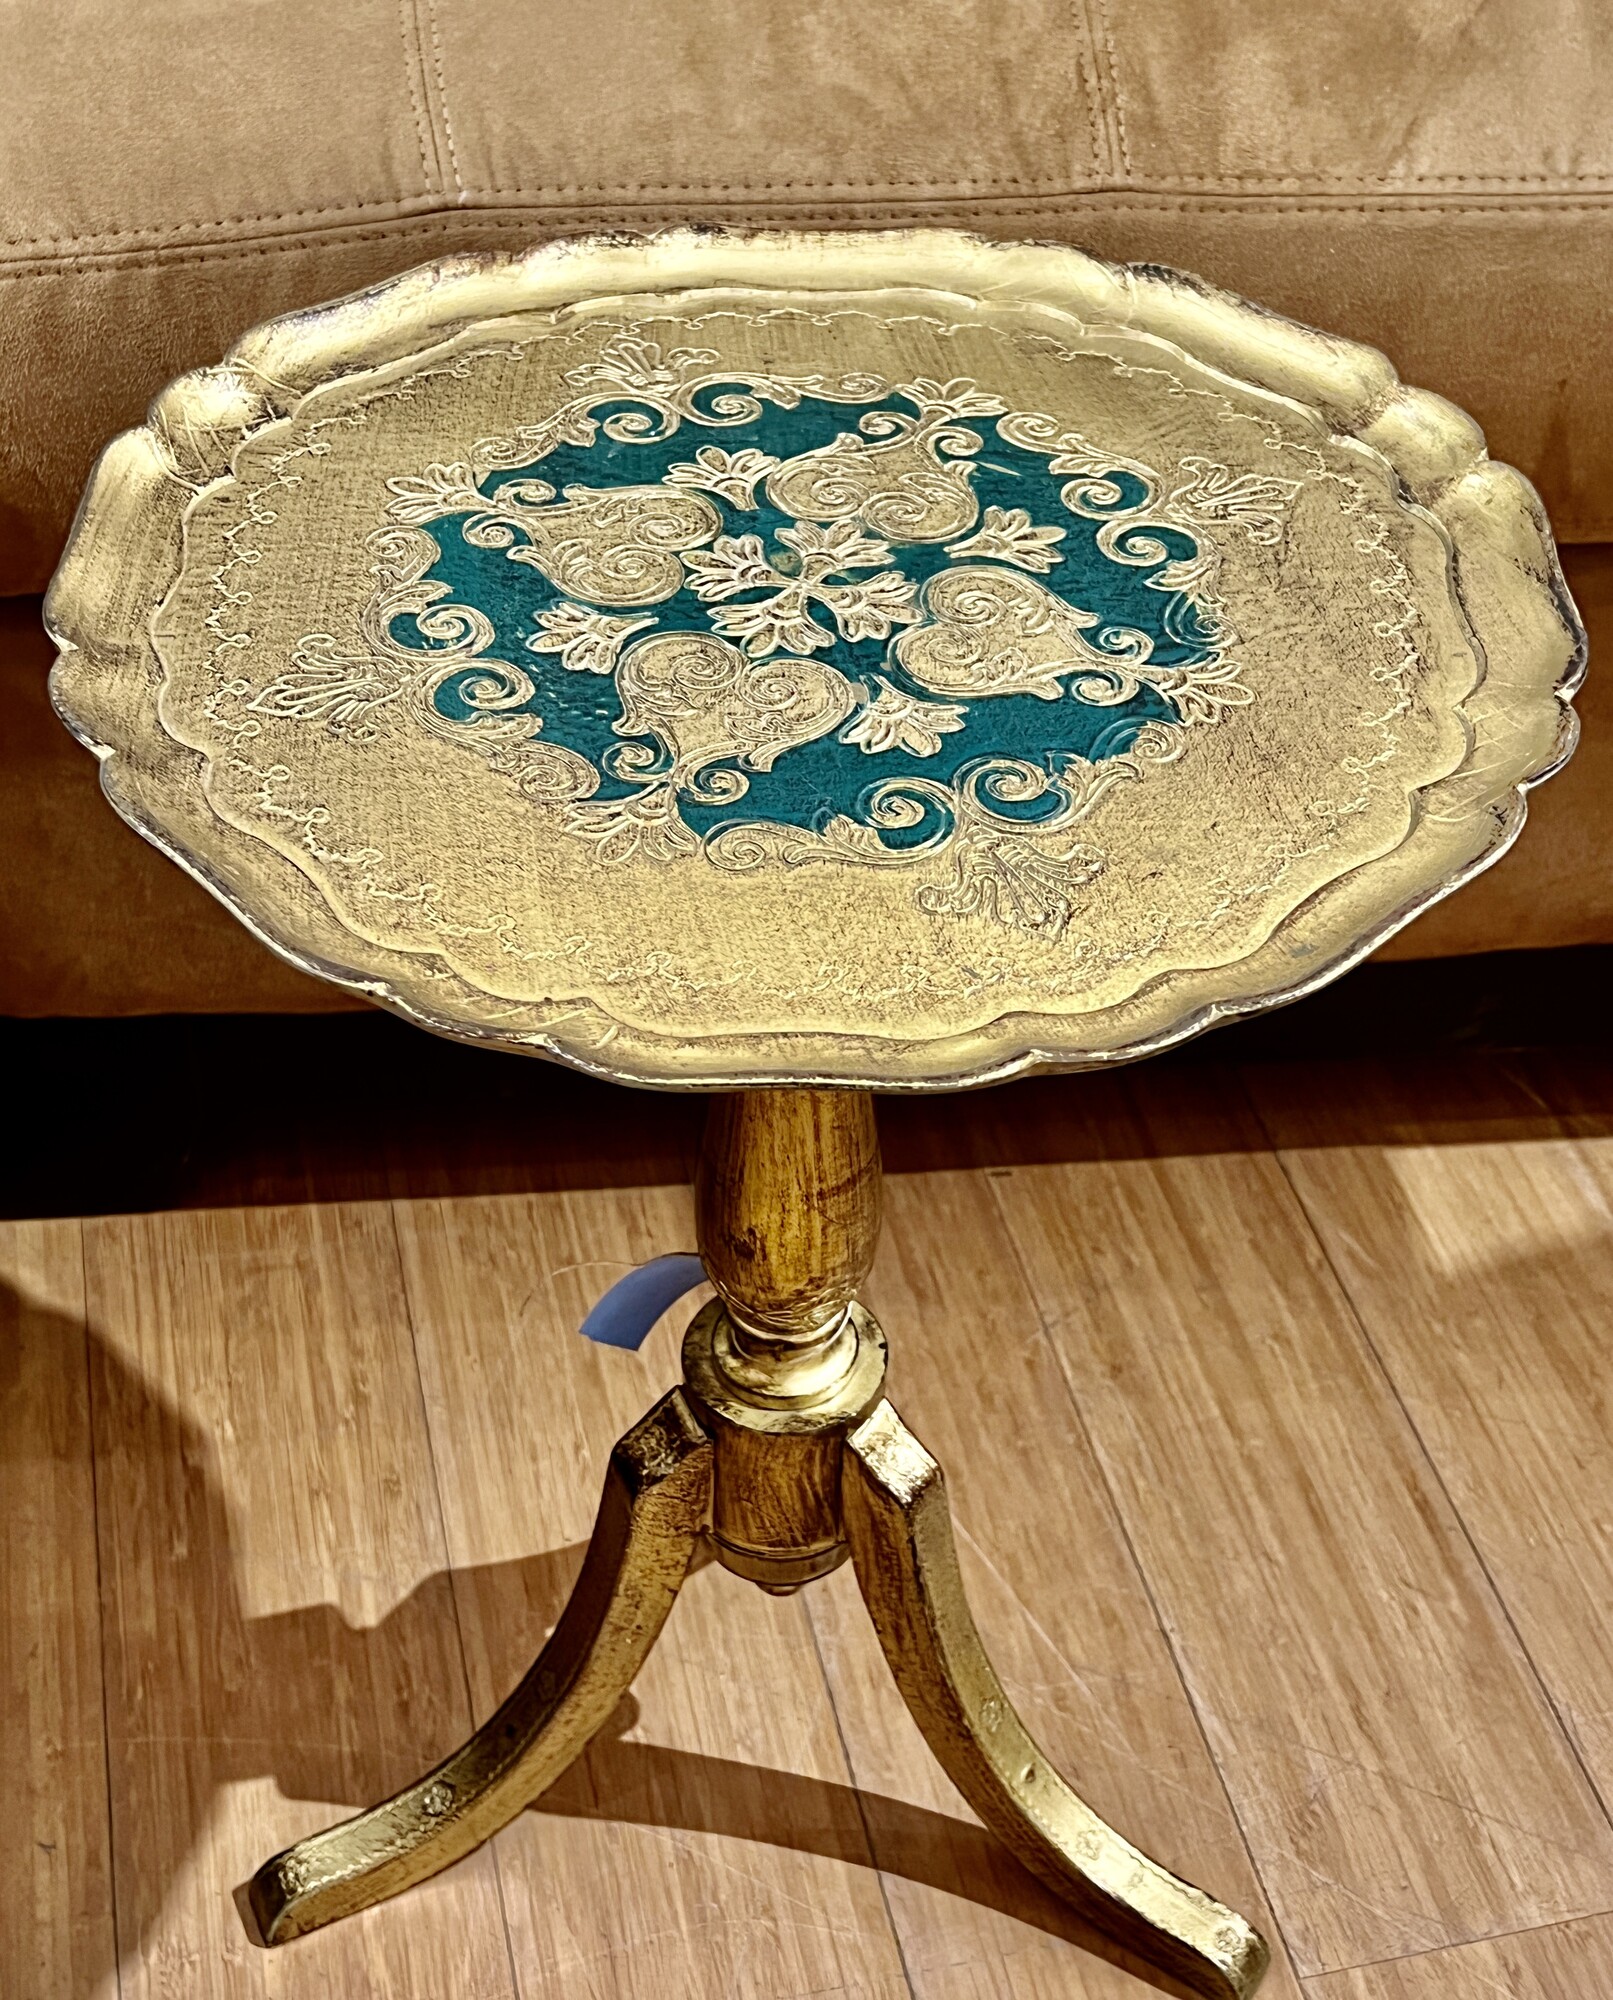 Gilt Accent Table
Size: 15x21